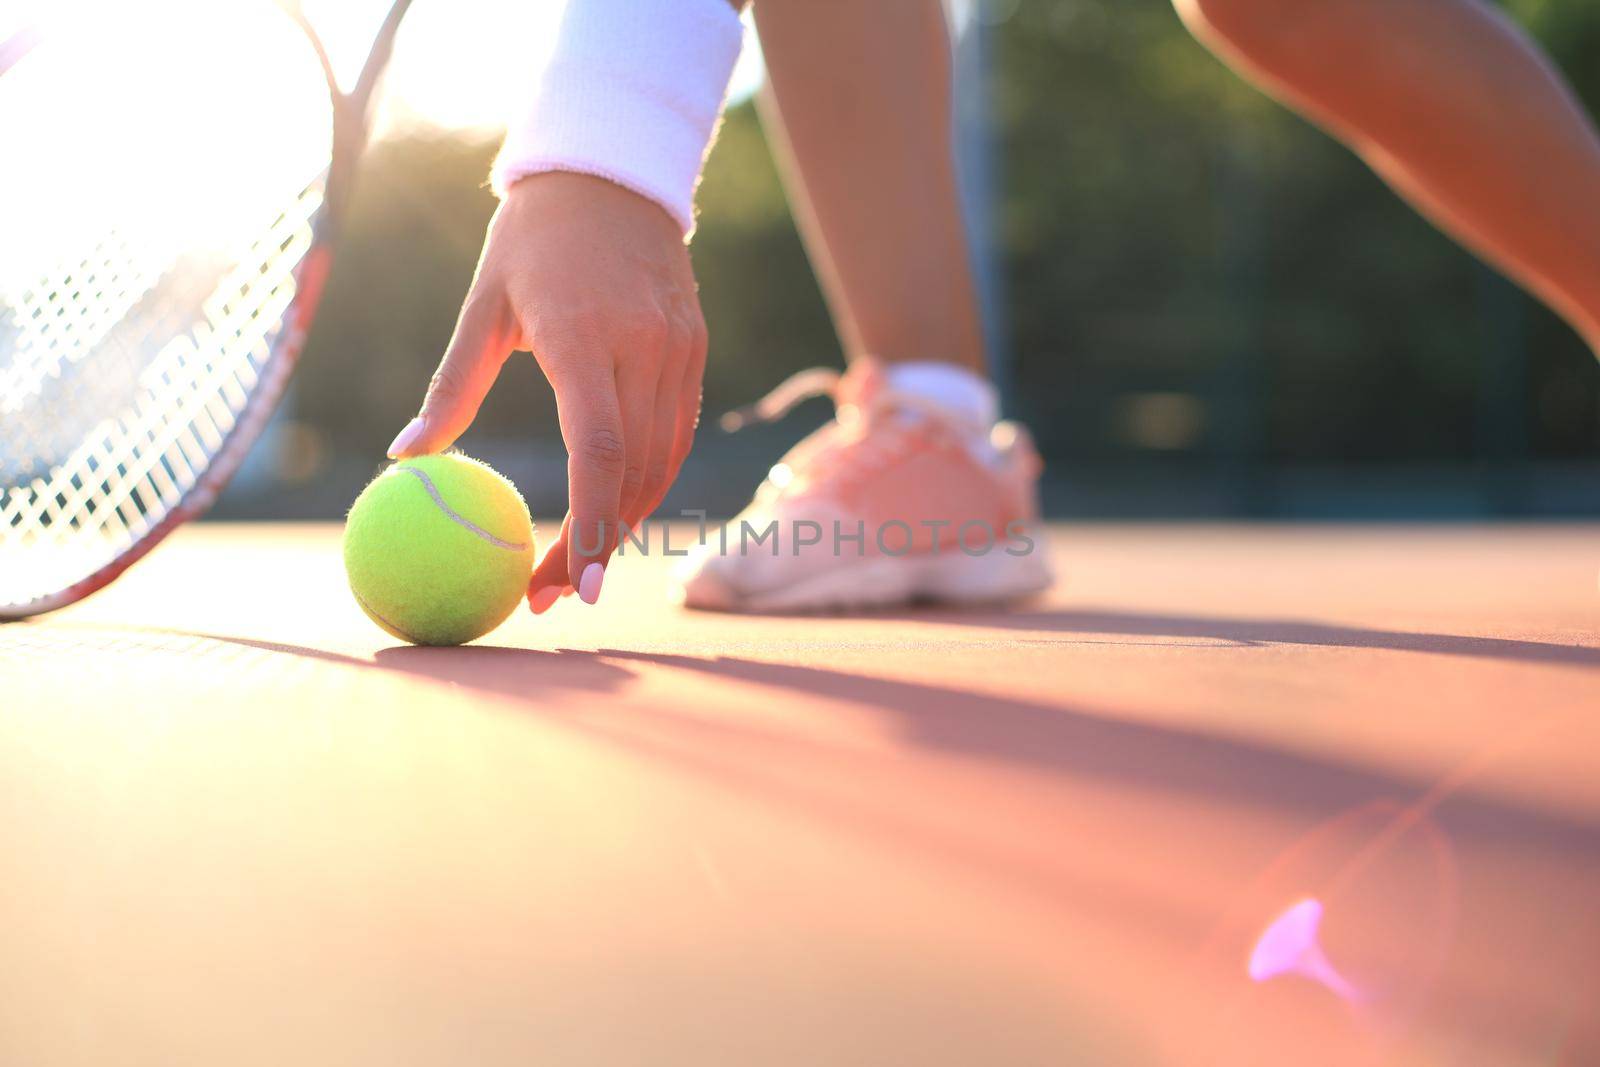 Tennis player raises a tennis ball from the clay court during the game